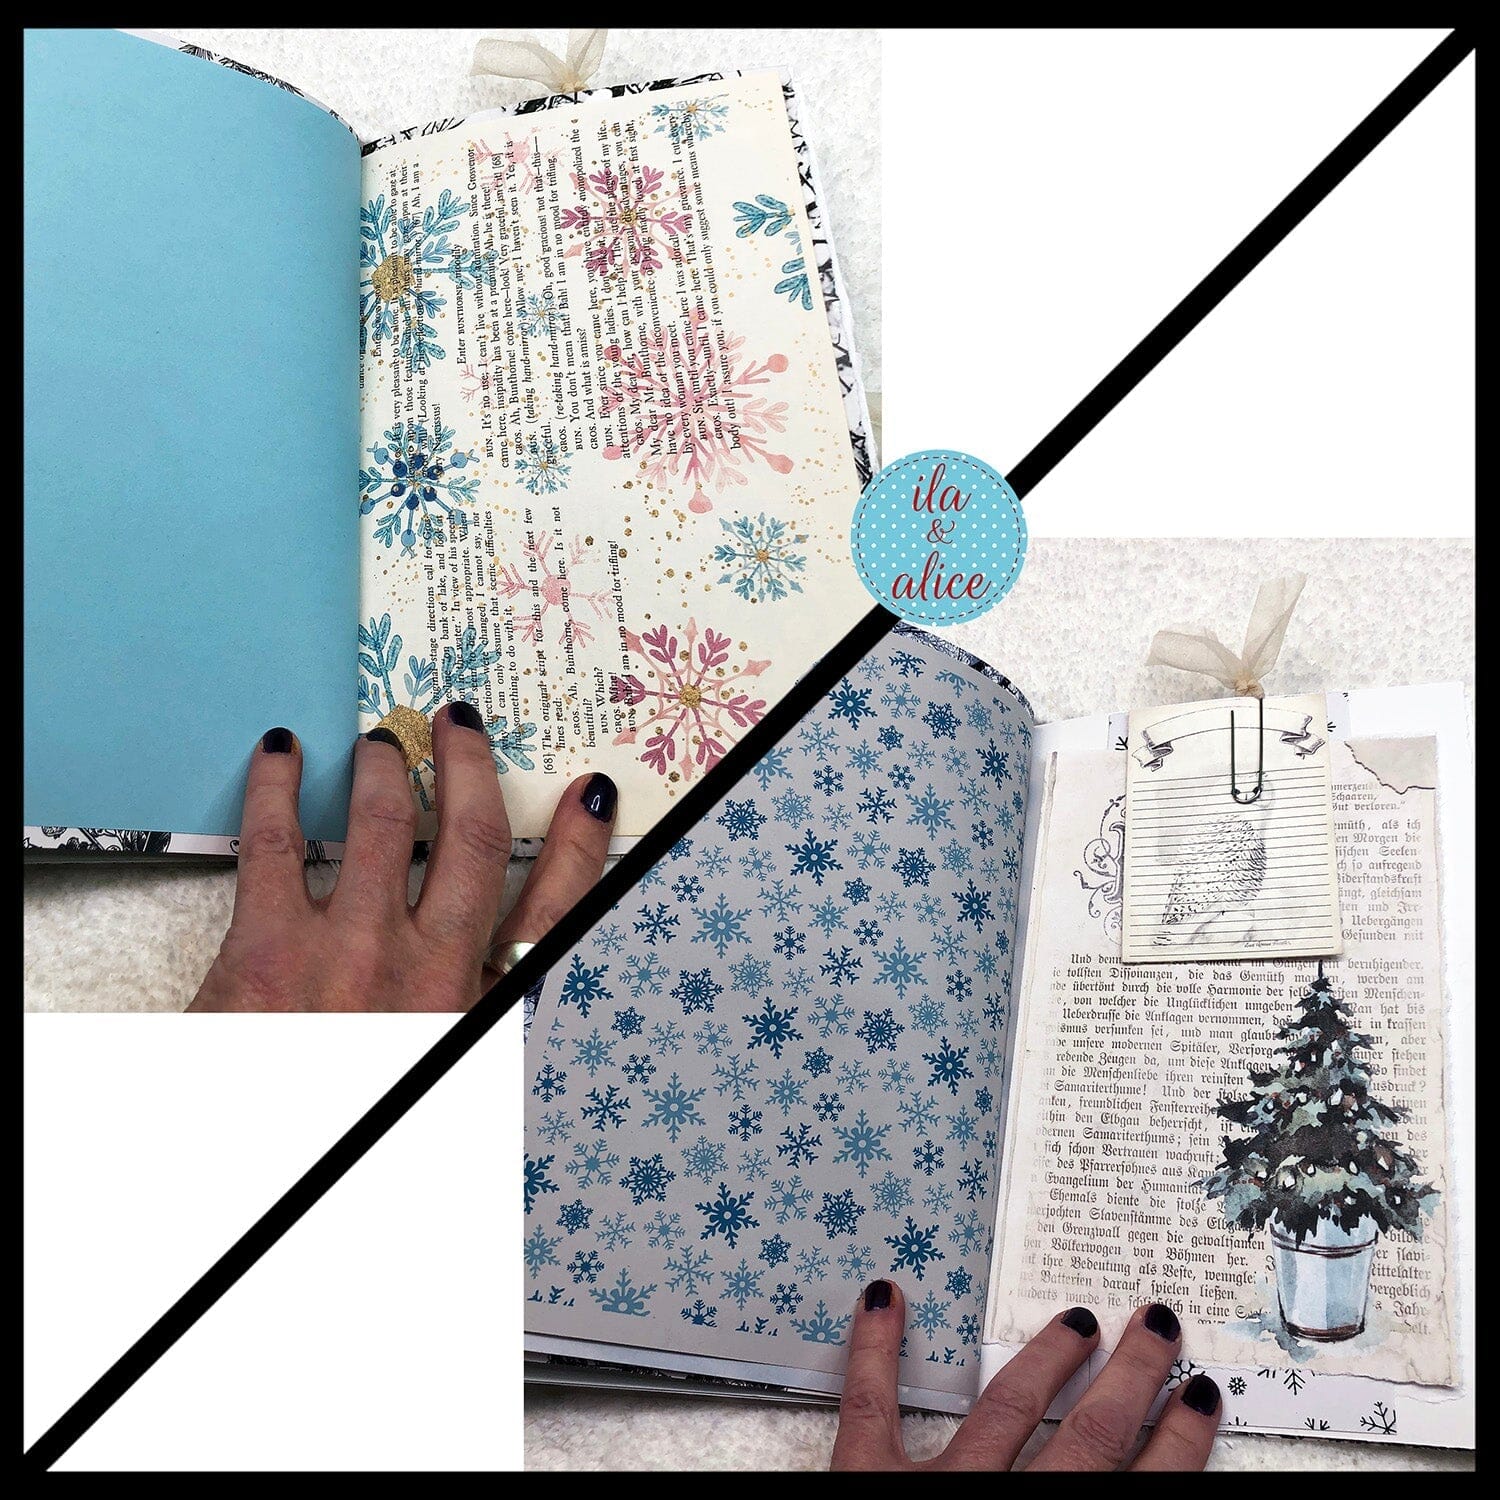 Pretty Blue Winter Junk Journal with Owl & Hare Collage Cover Journal ila & alice 